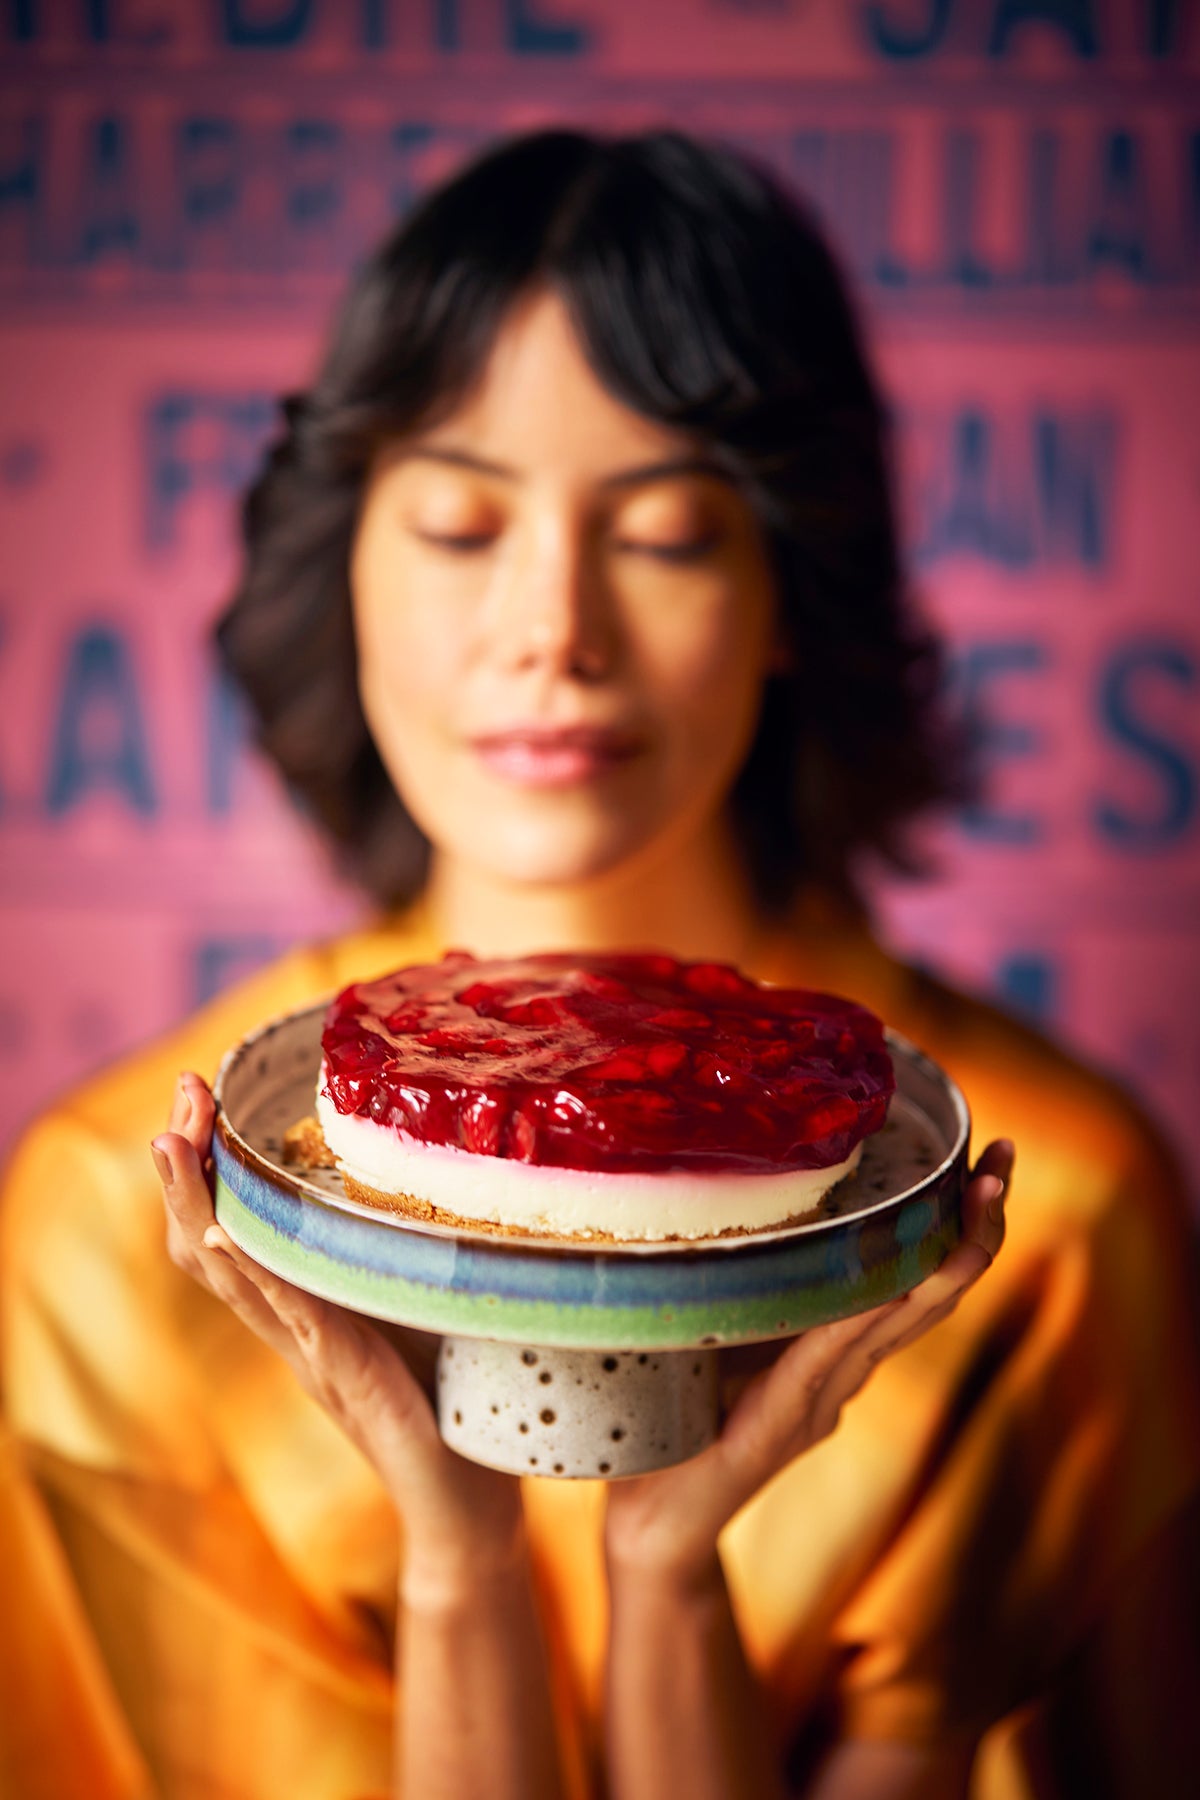 woamn holding retro style cake stand with cheesecake